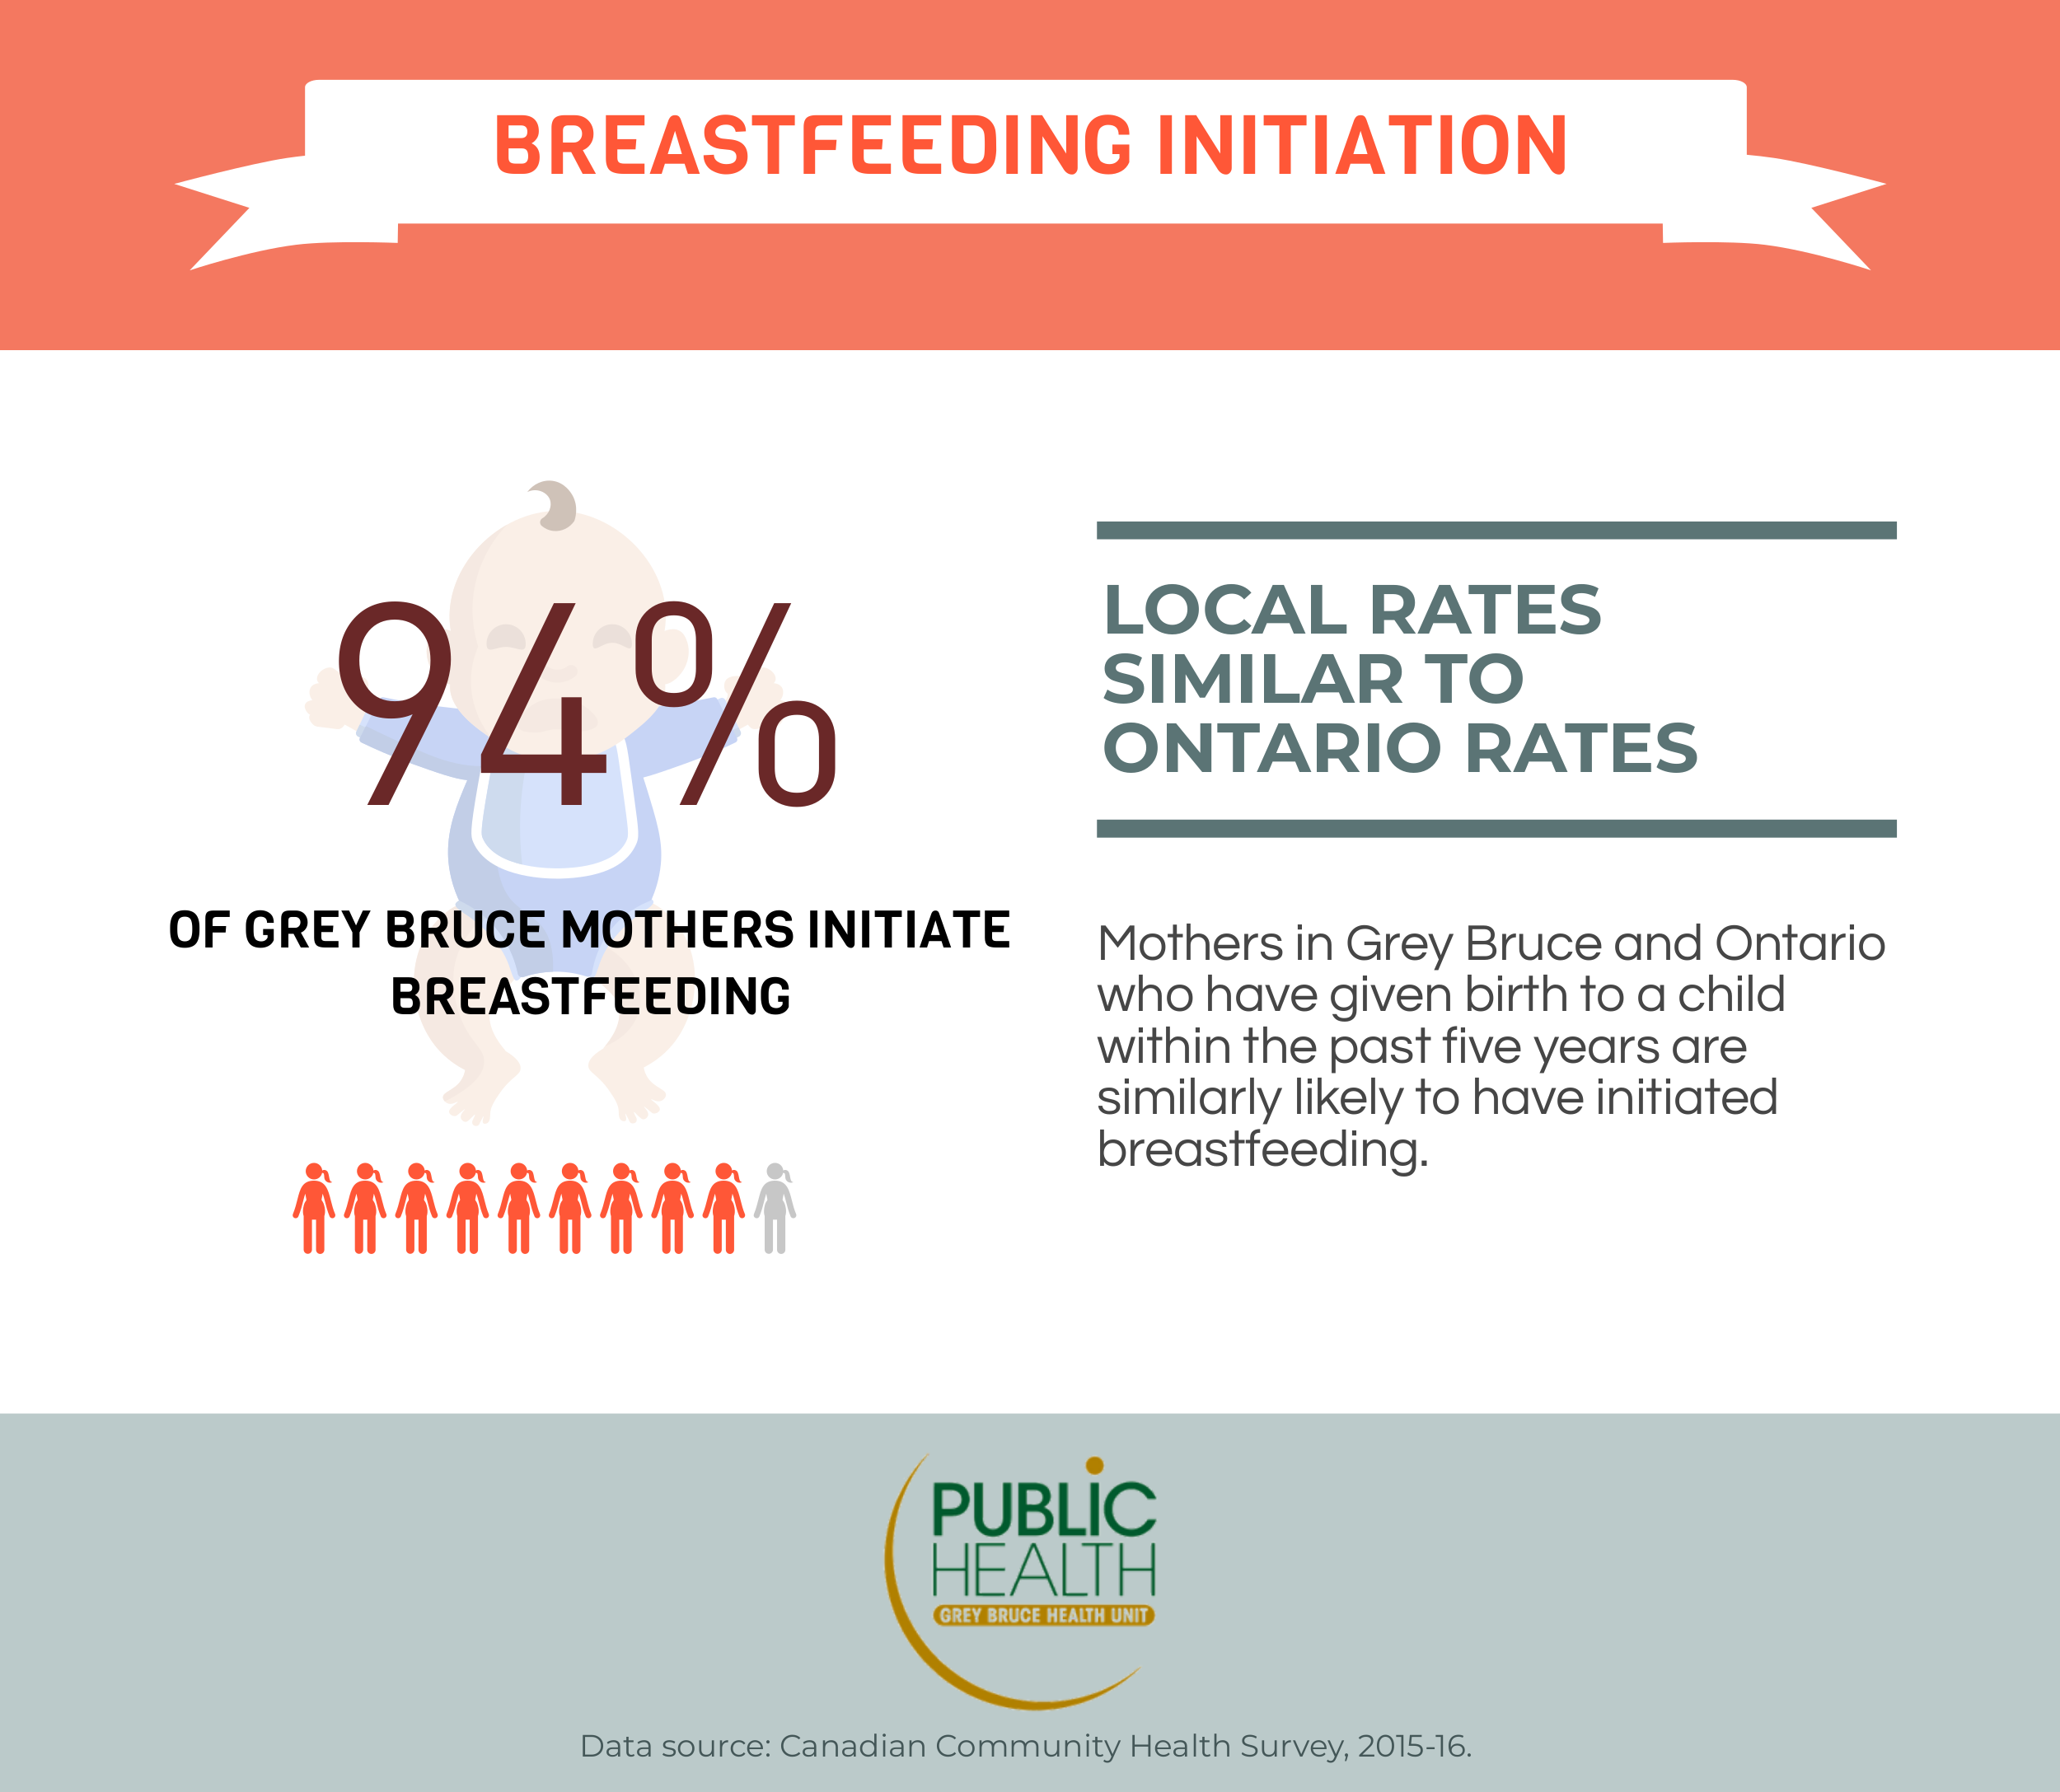 94% of new mothers in Grey Bruce initiate breastfeeding which is similar to the Ontario rate